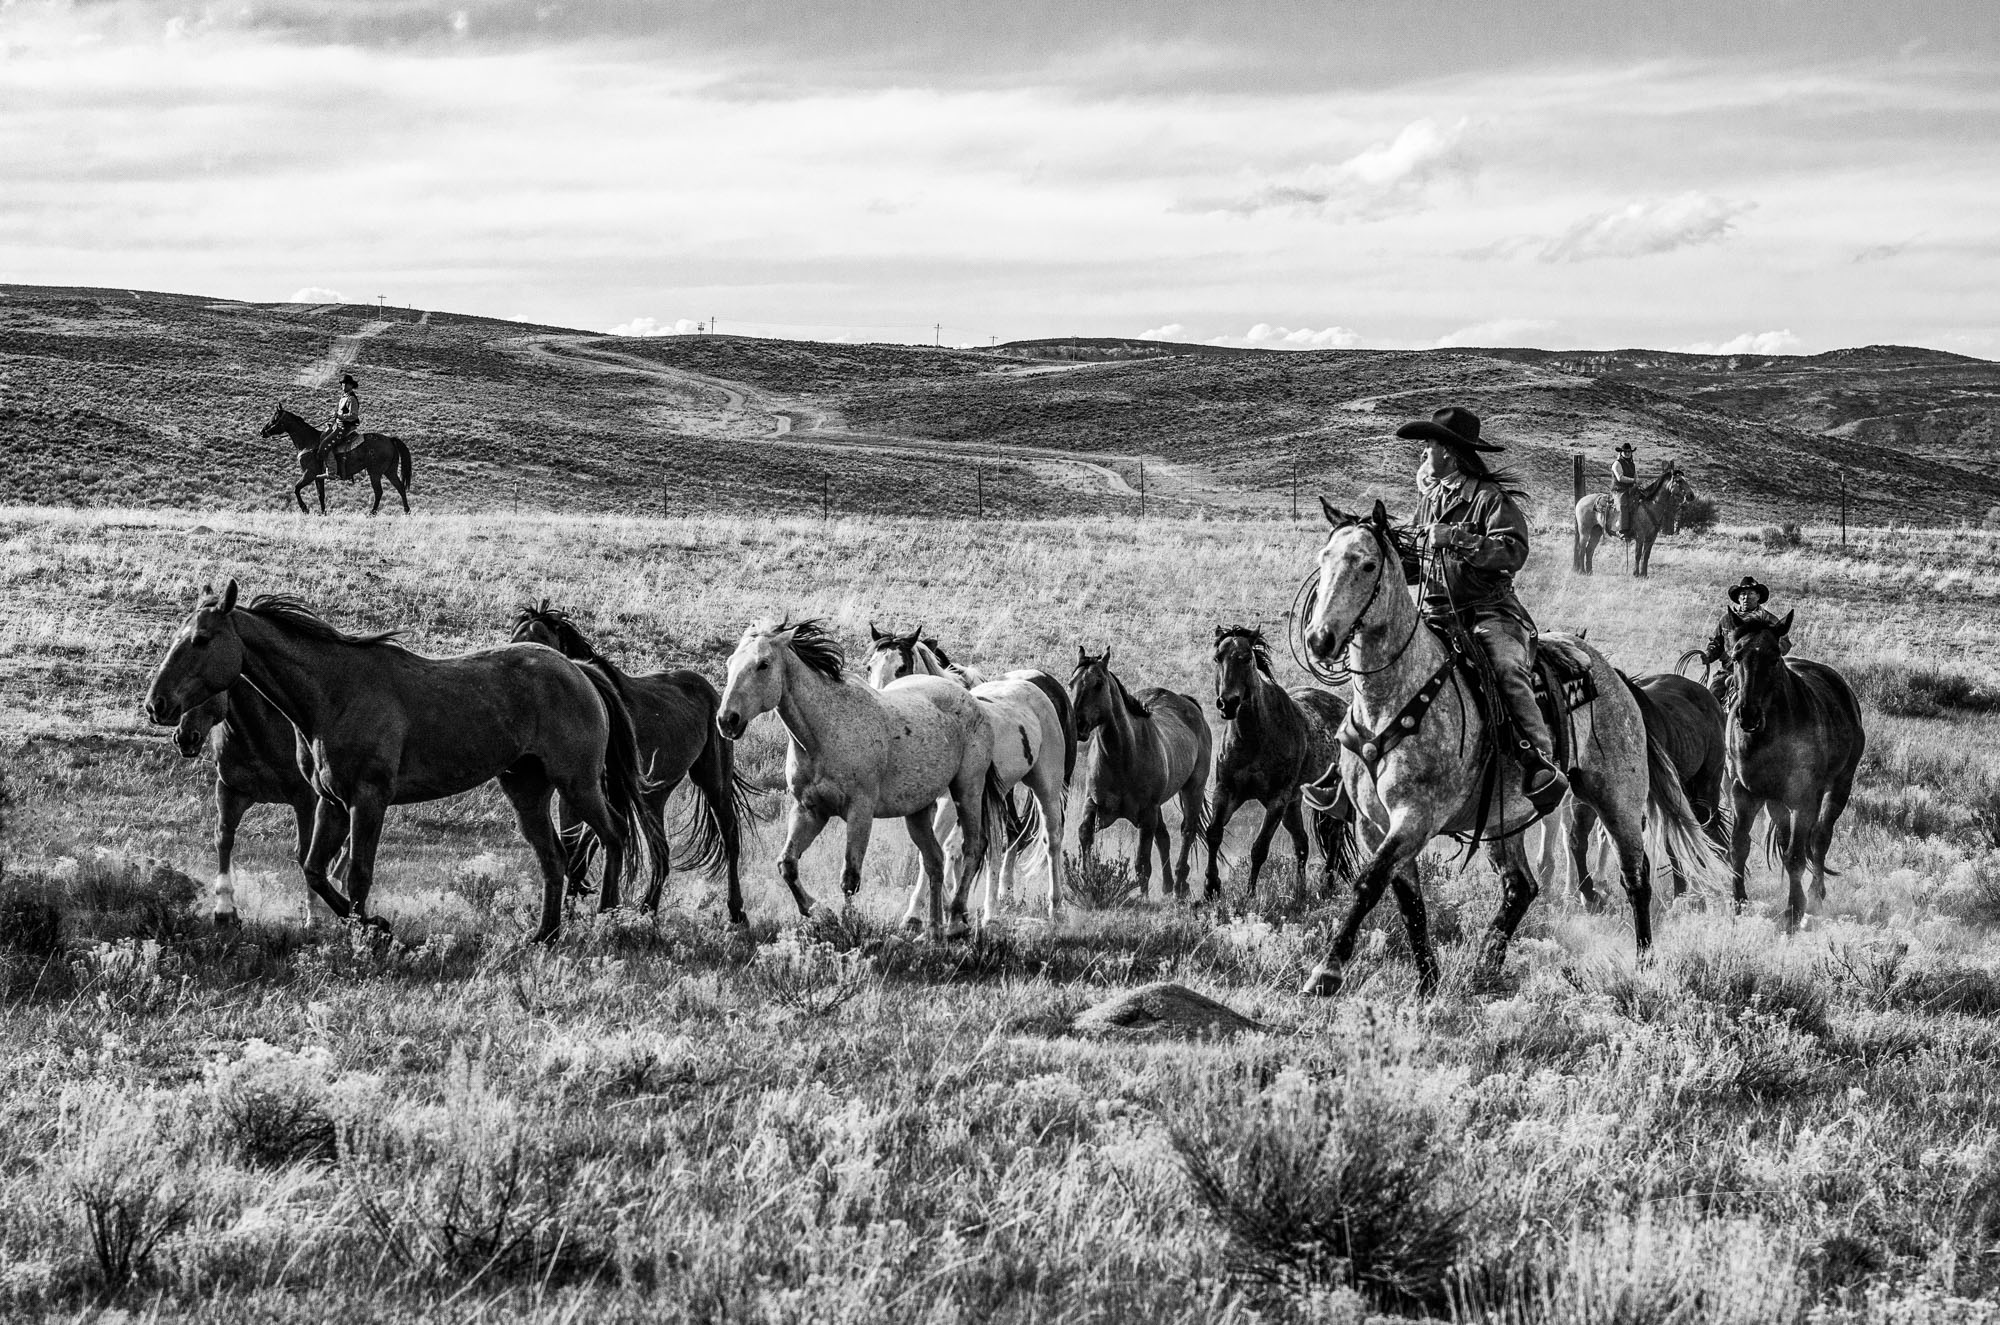 Fine Art Limited Edition Photo Prints of Cowboys, Horses, and life in the West. Open Range. A Cowboy picture in black and white...